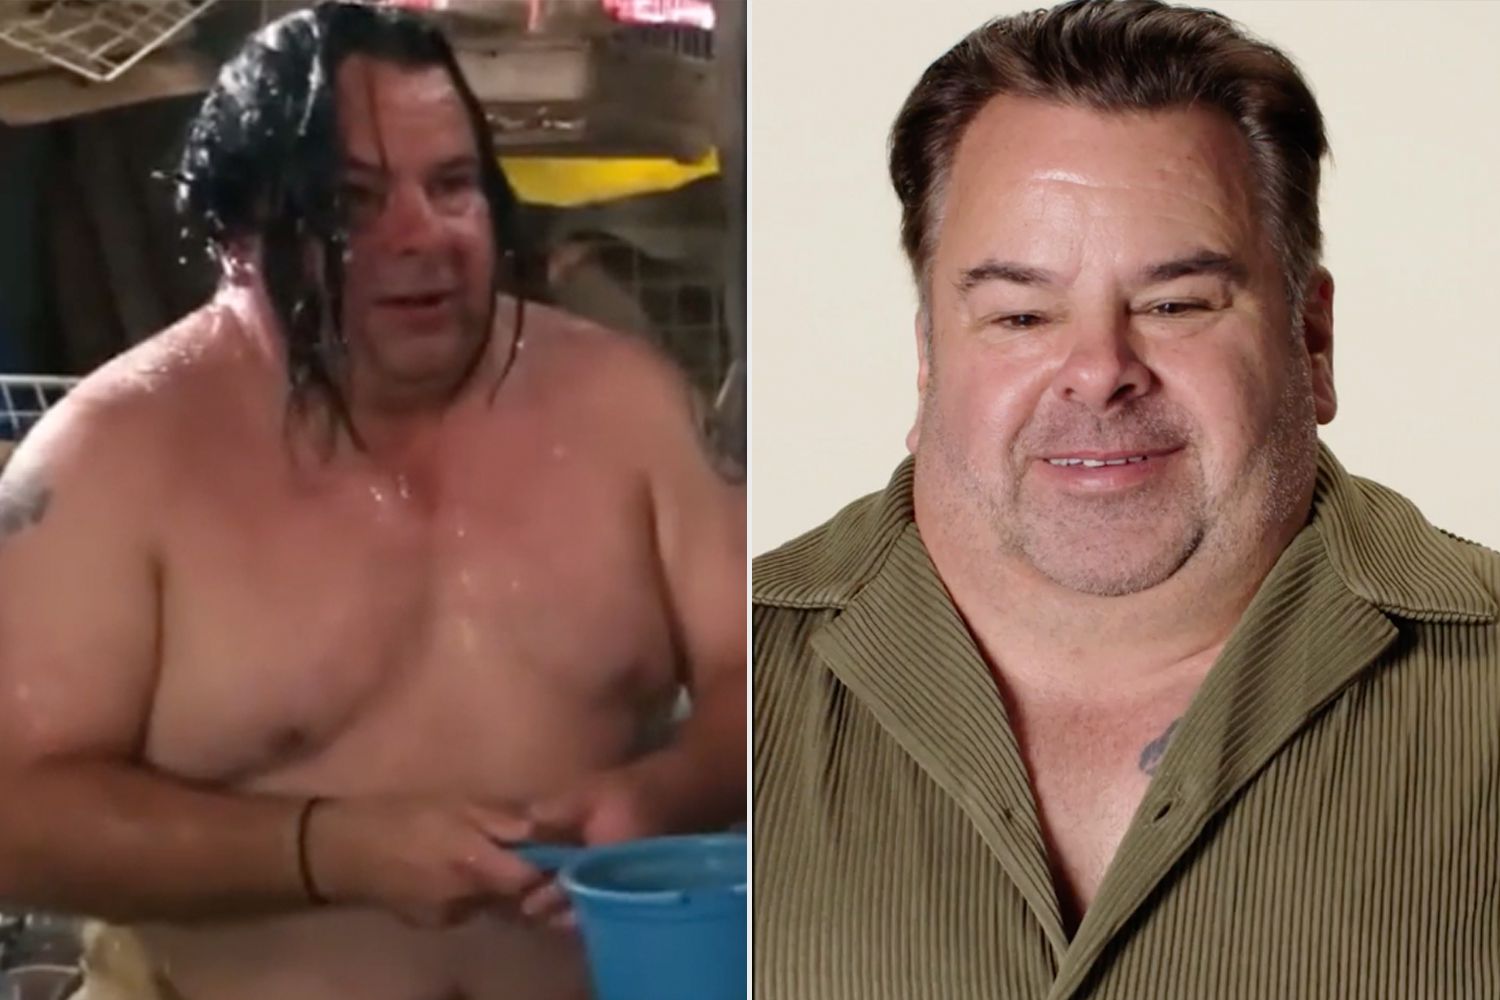 Big Ed&#8217;s Unforgettable Shower Scene with Rosemarie&#8217;s Family in &#8217;90 Day Fiancé&#8217;